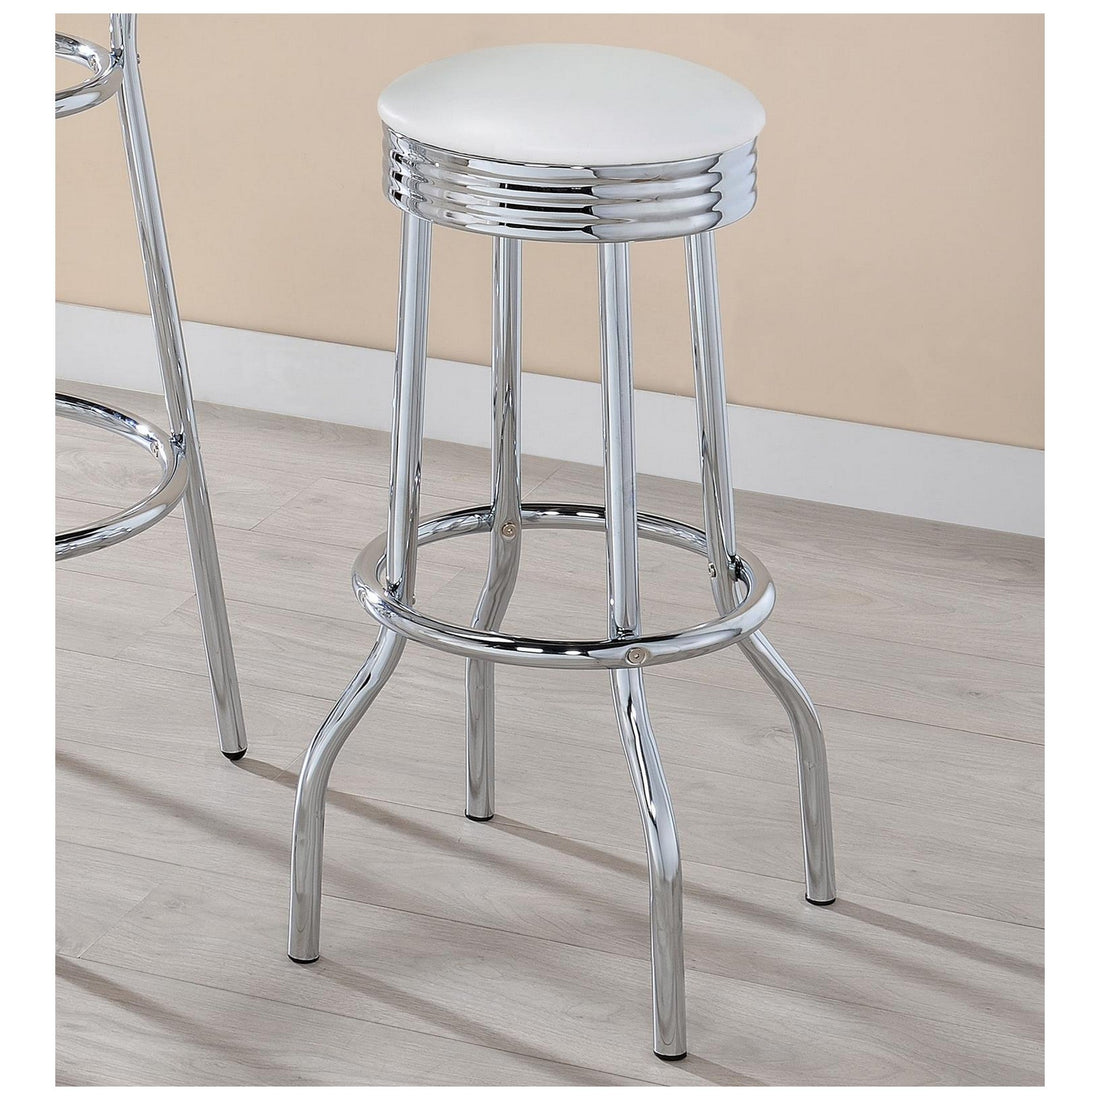 Theodore Upholstered Top Bar Stools White and Chrome (Set of 2) 2299W